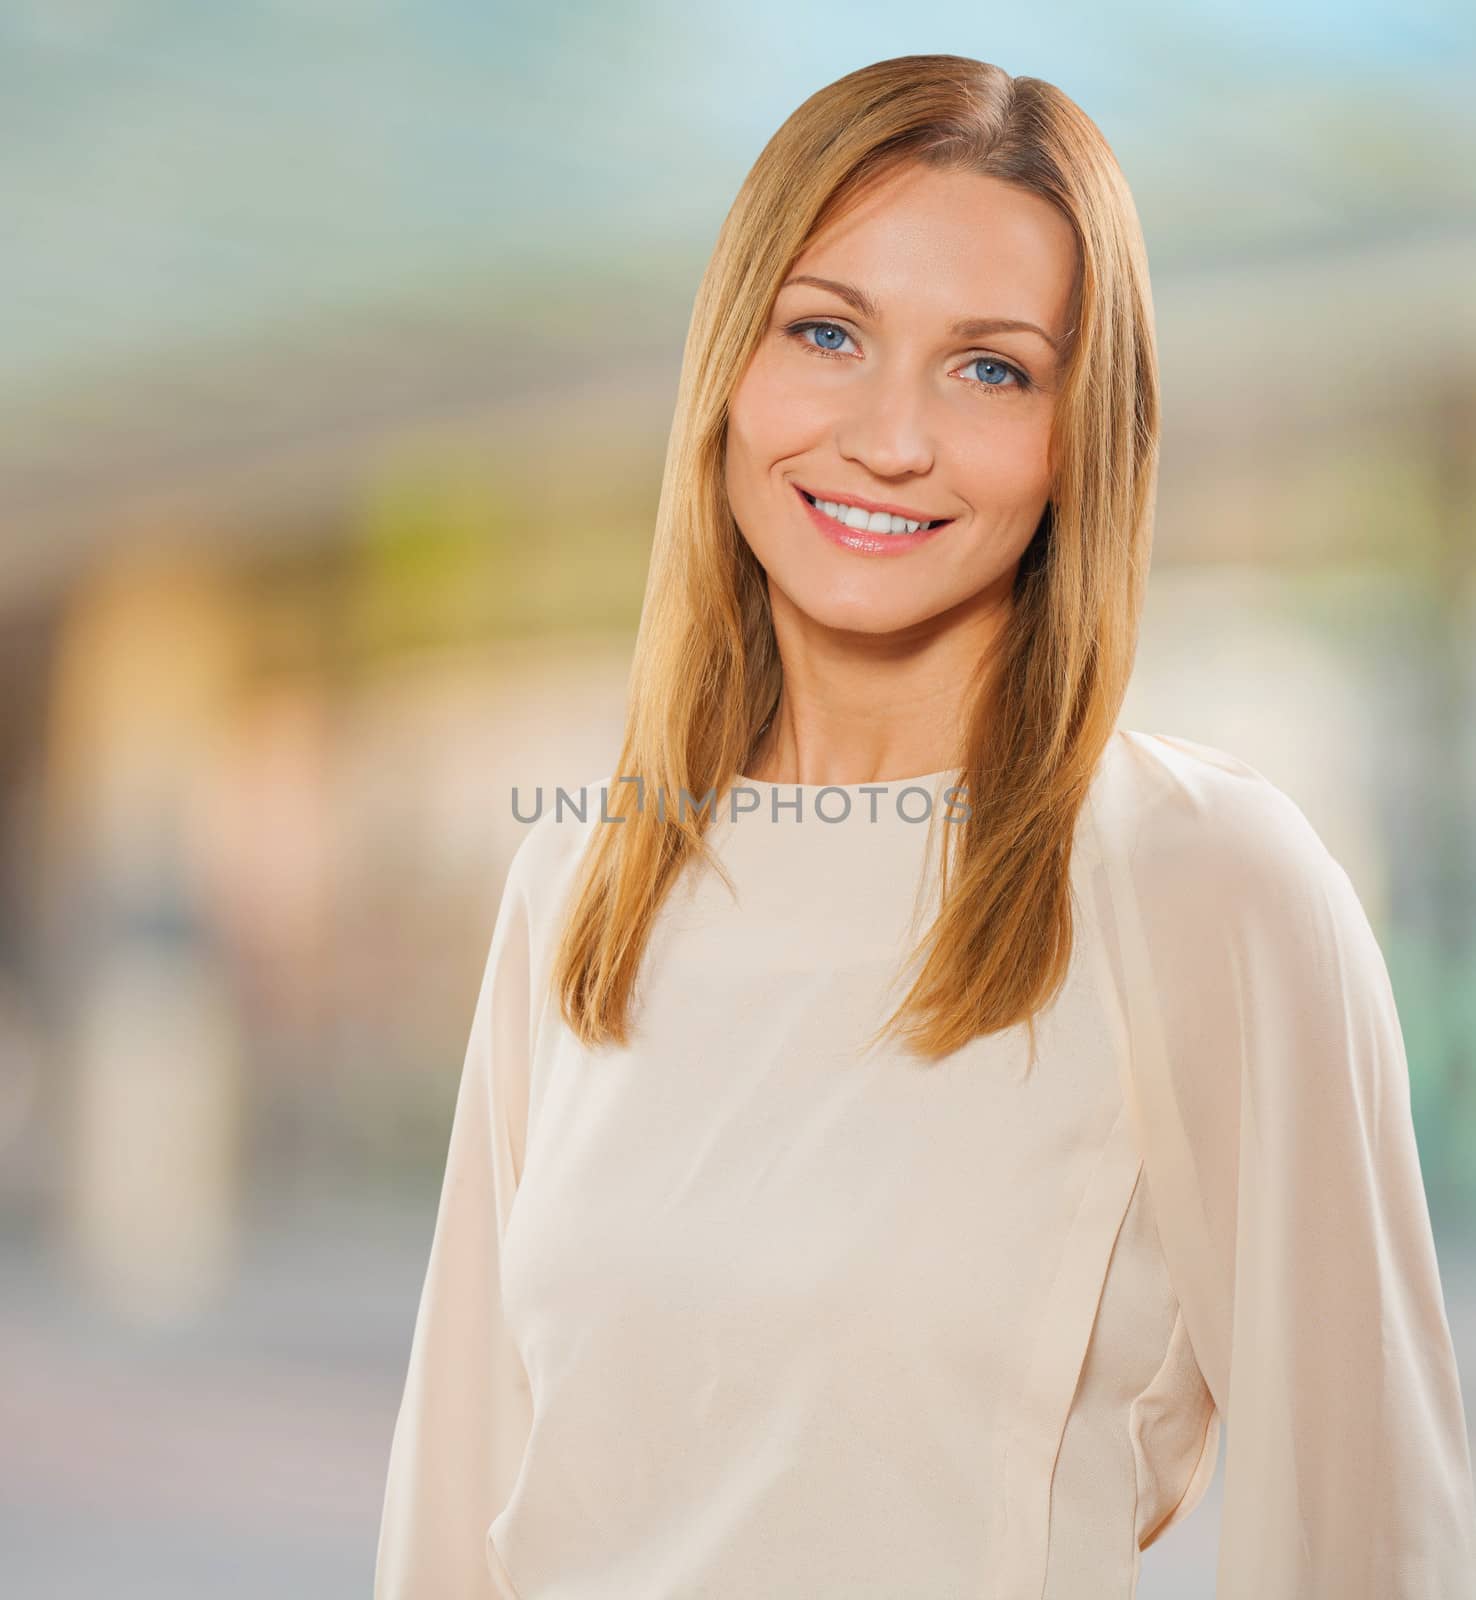 a smiling female by mihalec